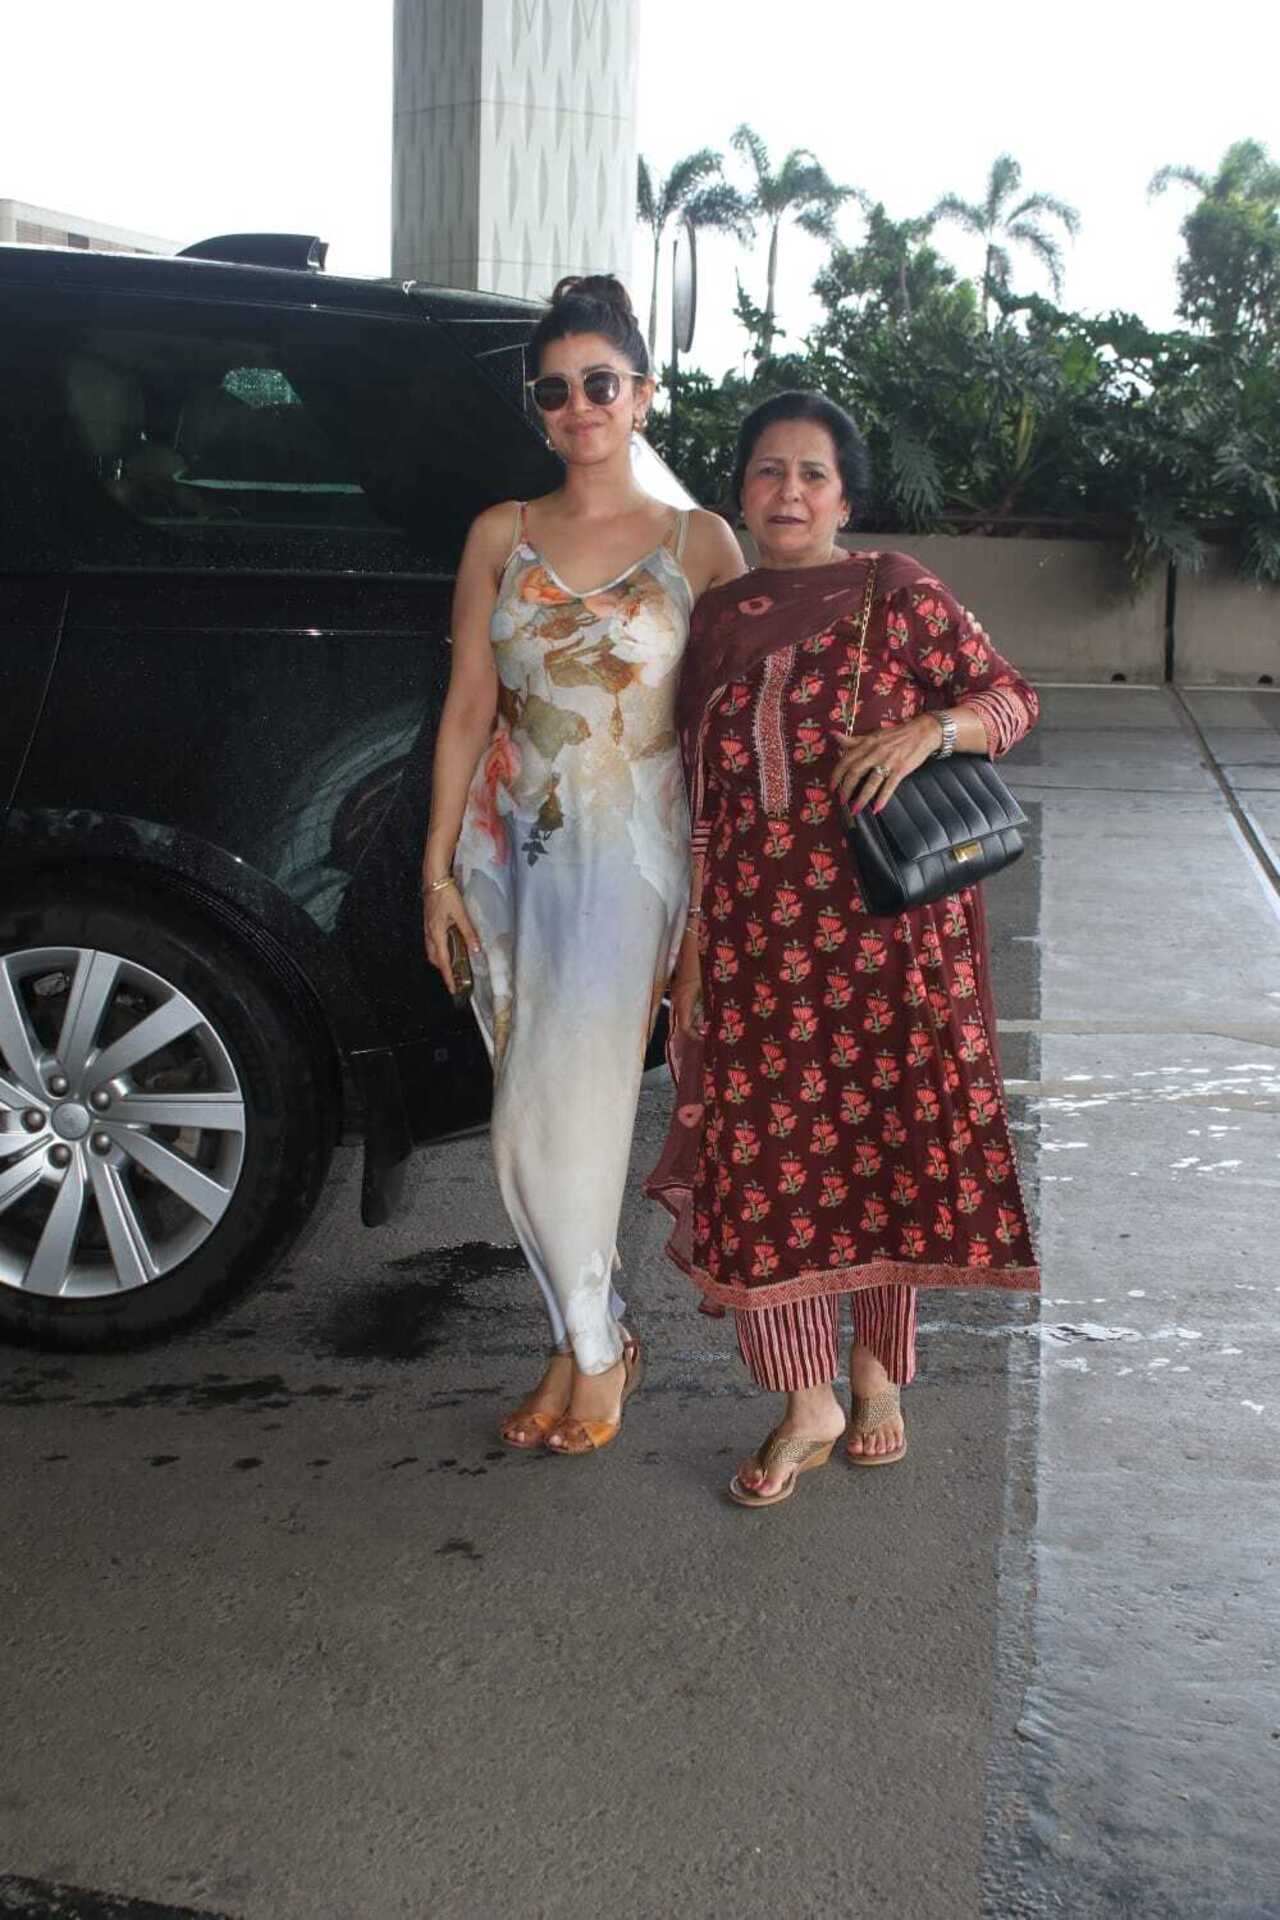 Nimrat Kaur posed with her mother as they were snapped at the airport